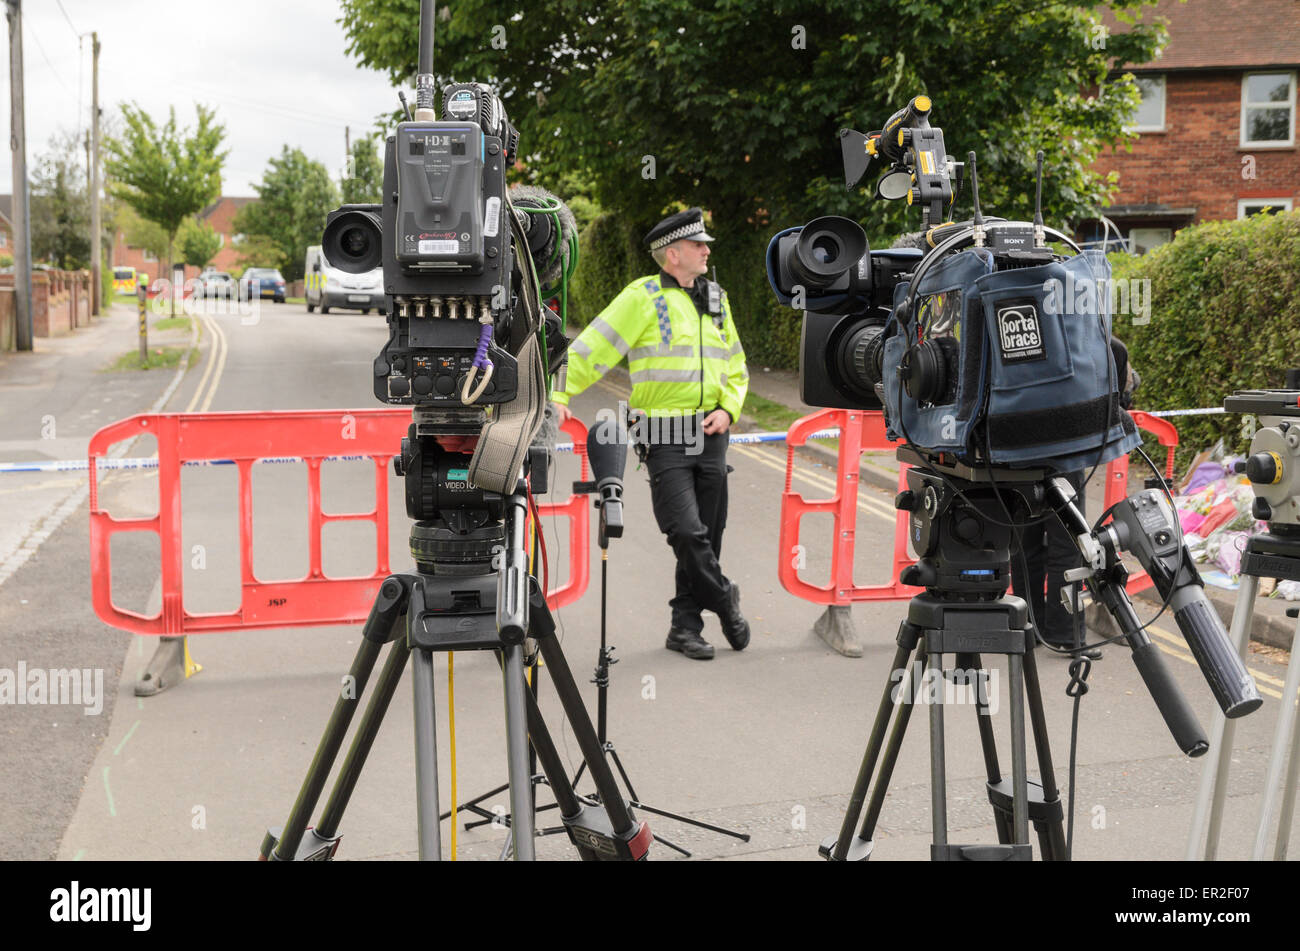 Didcot, UK. 25th May, 2015. The Police cordon at the scene of a triple murder at Vicarage Road, Didcot, Oxfordshire, U.K 17.21 Hours on 25 May 2015. Credit:  Michael Winters/Alamy Live News Stock Photo